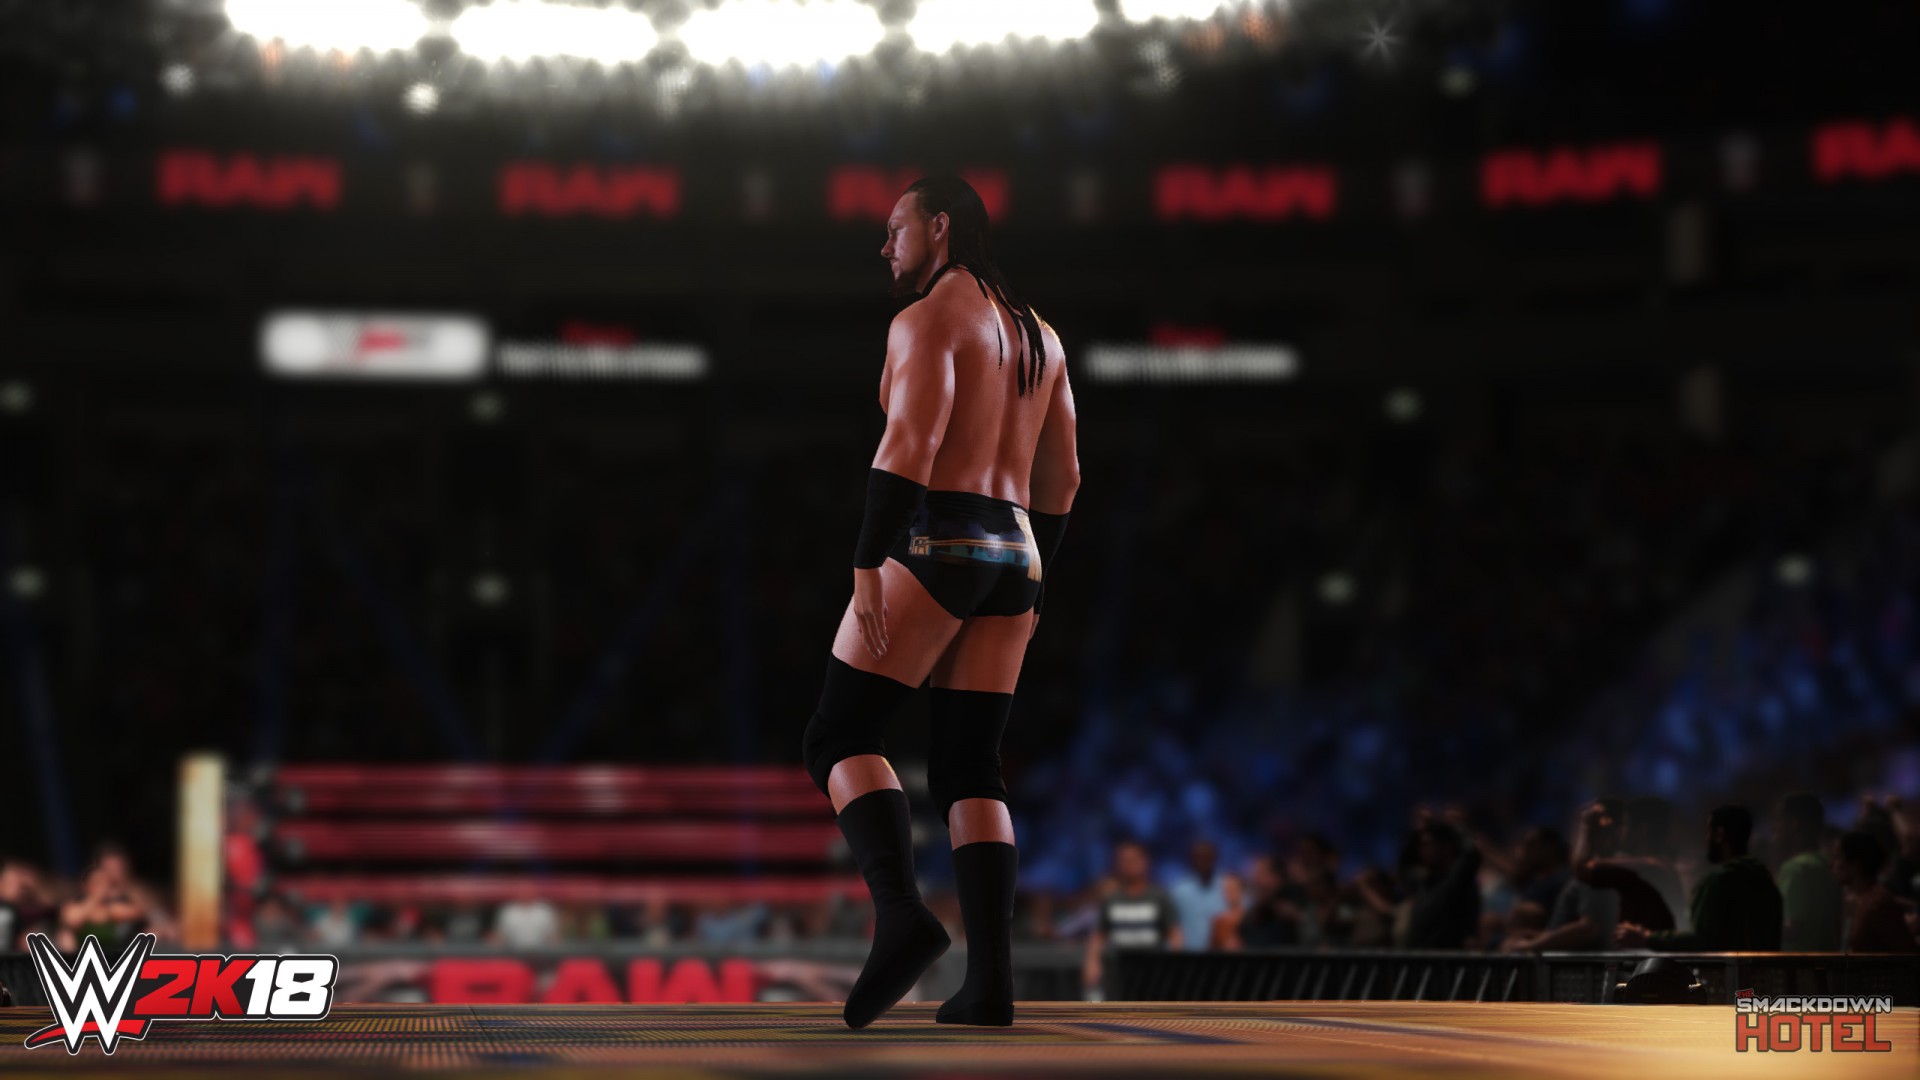 Wwe 2k18 Image Gallery Screenshots For Playstation